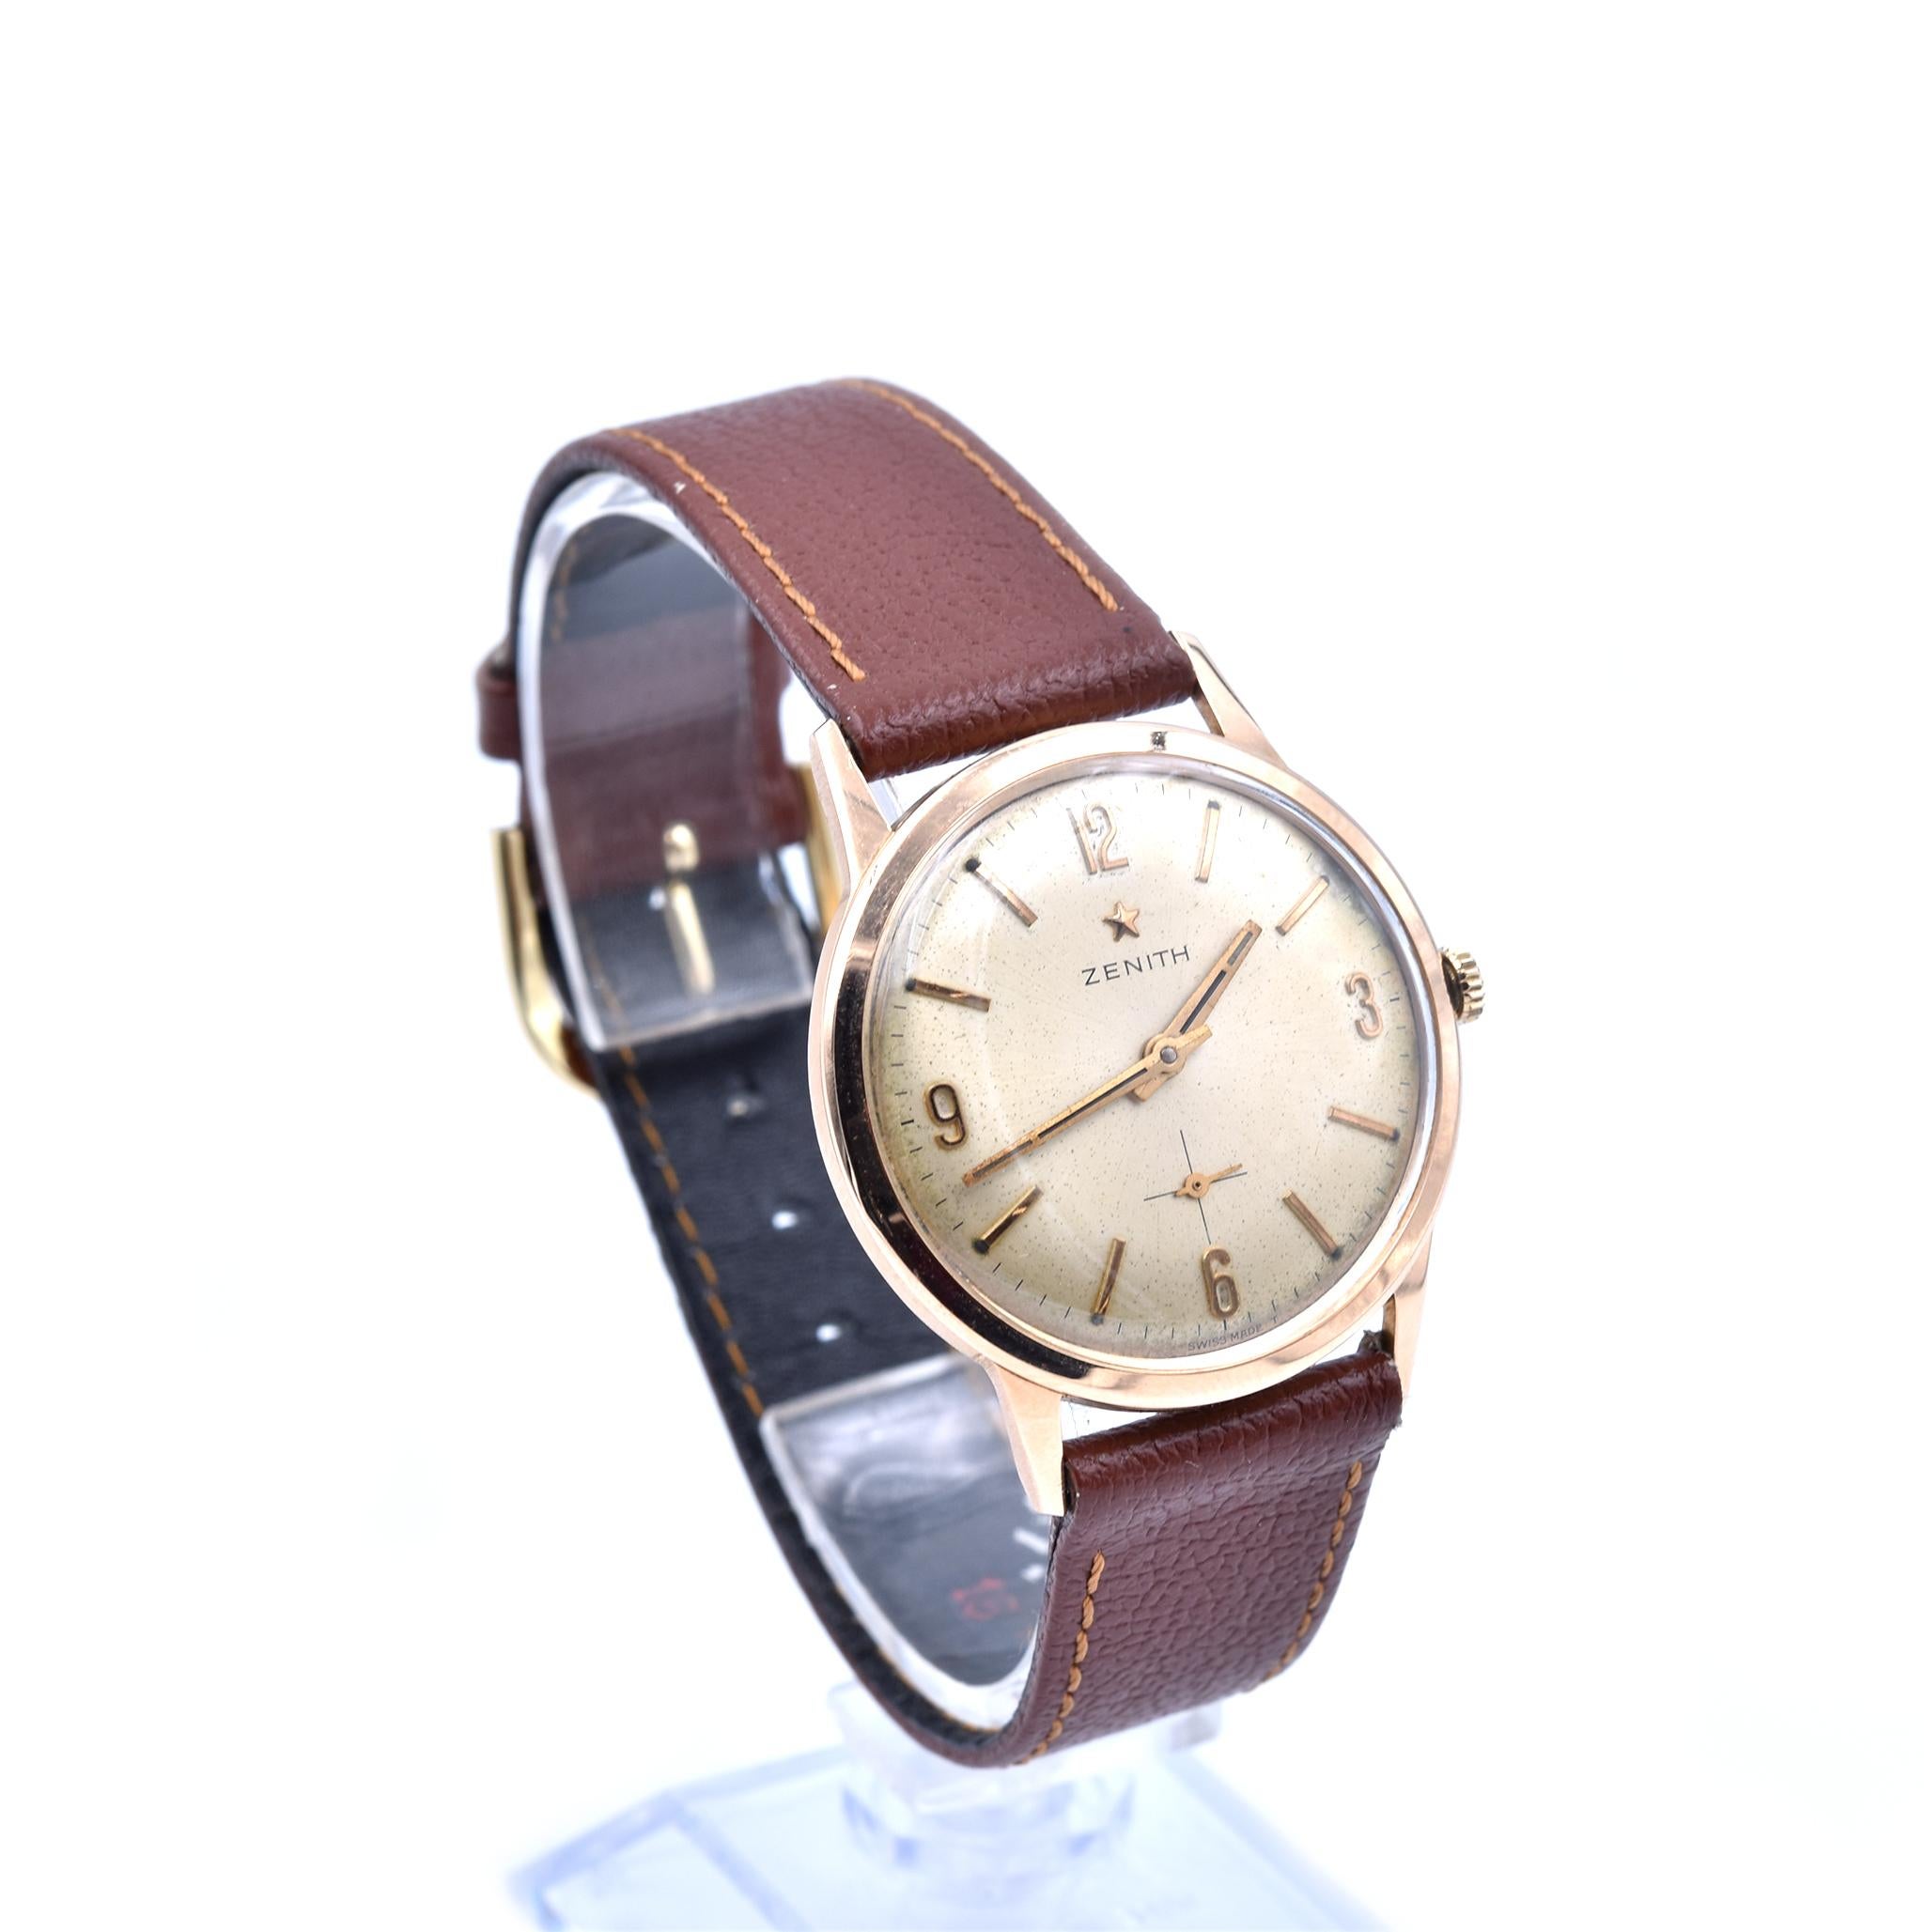 Movement: manual winding
Function: hour, minute, small seconds
Case: 34mm 18k rose gold case, plastic crystal
Band: brown leather strap with tang buckle
Dial: gold dial with Arabic numerals, gold tone hands
Calibre #: 2541	
Jewels #: 17

No Box or